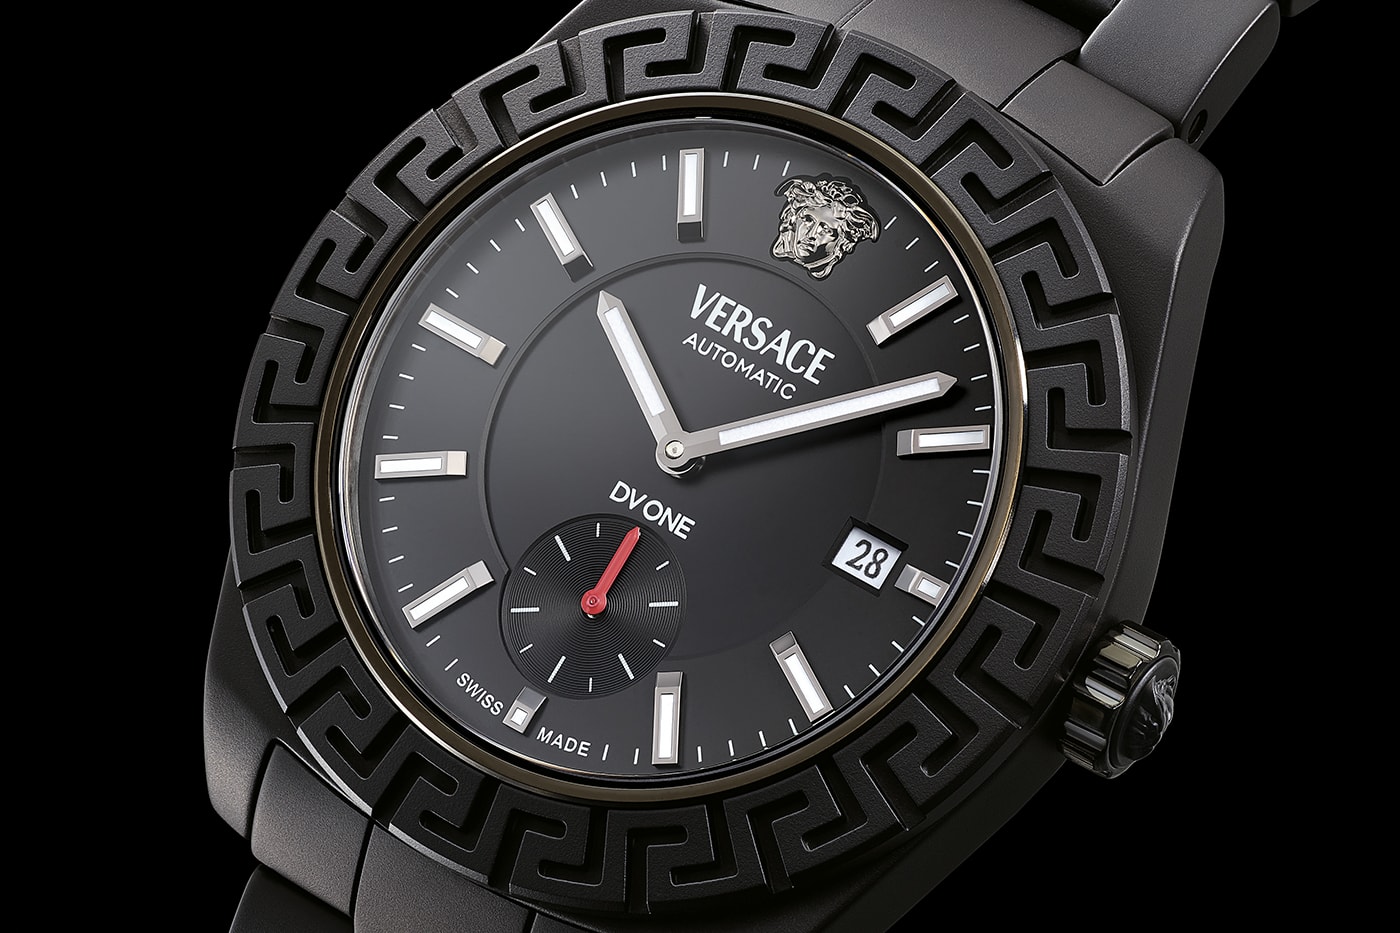 Versace DV One Gent Limited-Edition Release Info